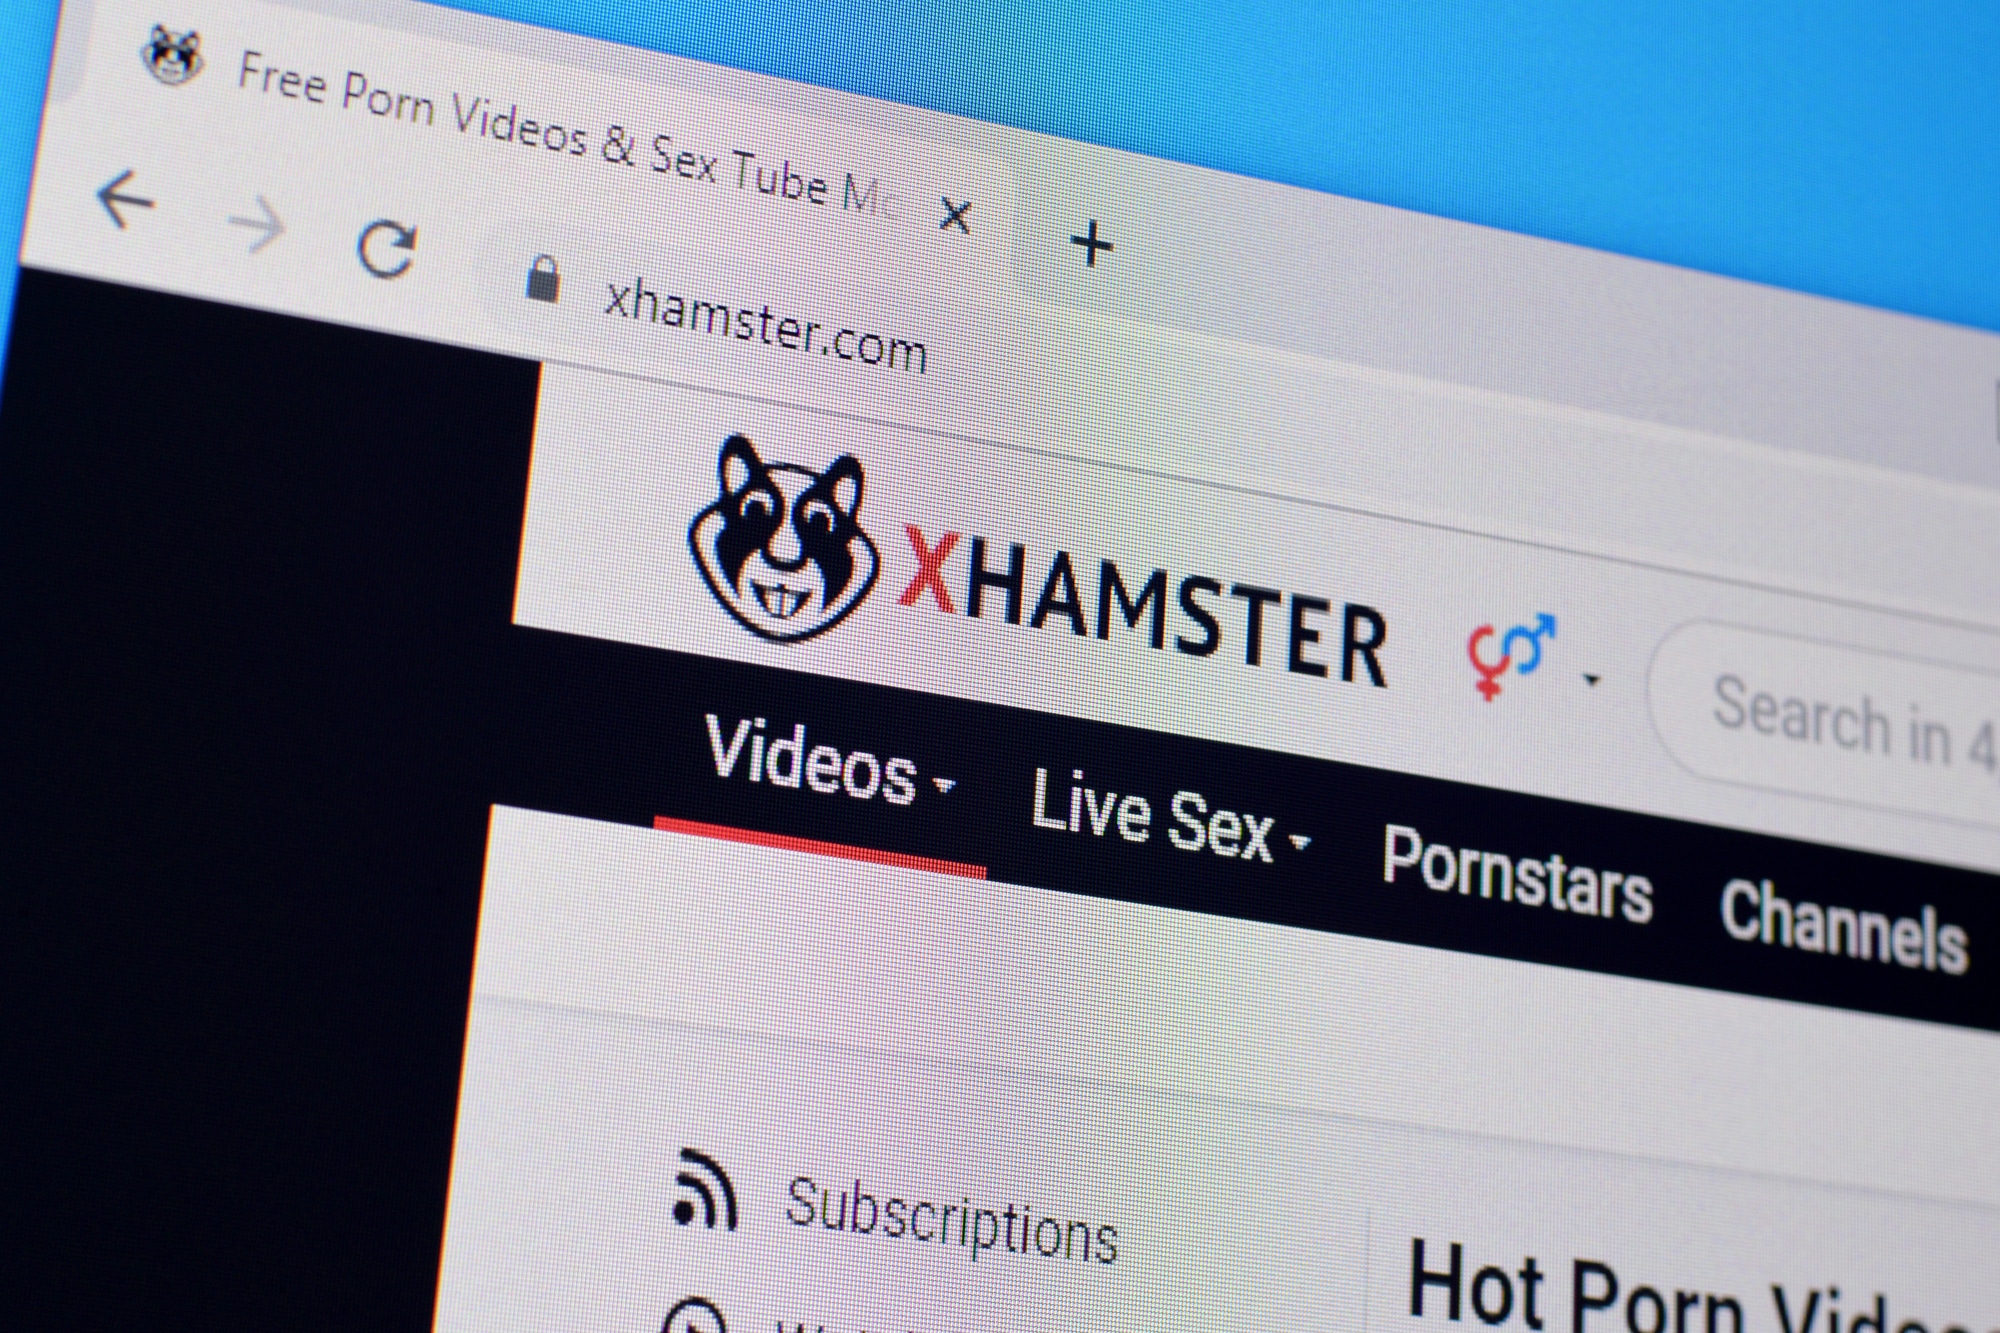 Xhmstervideo - xHamster blocking: TelefÃ³nica wants to sue against blocking